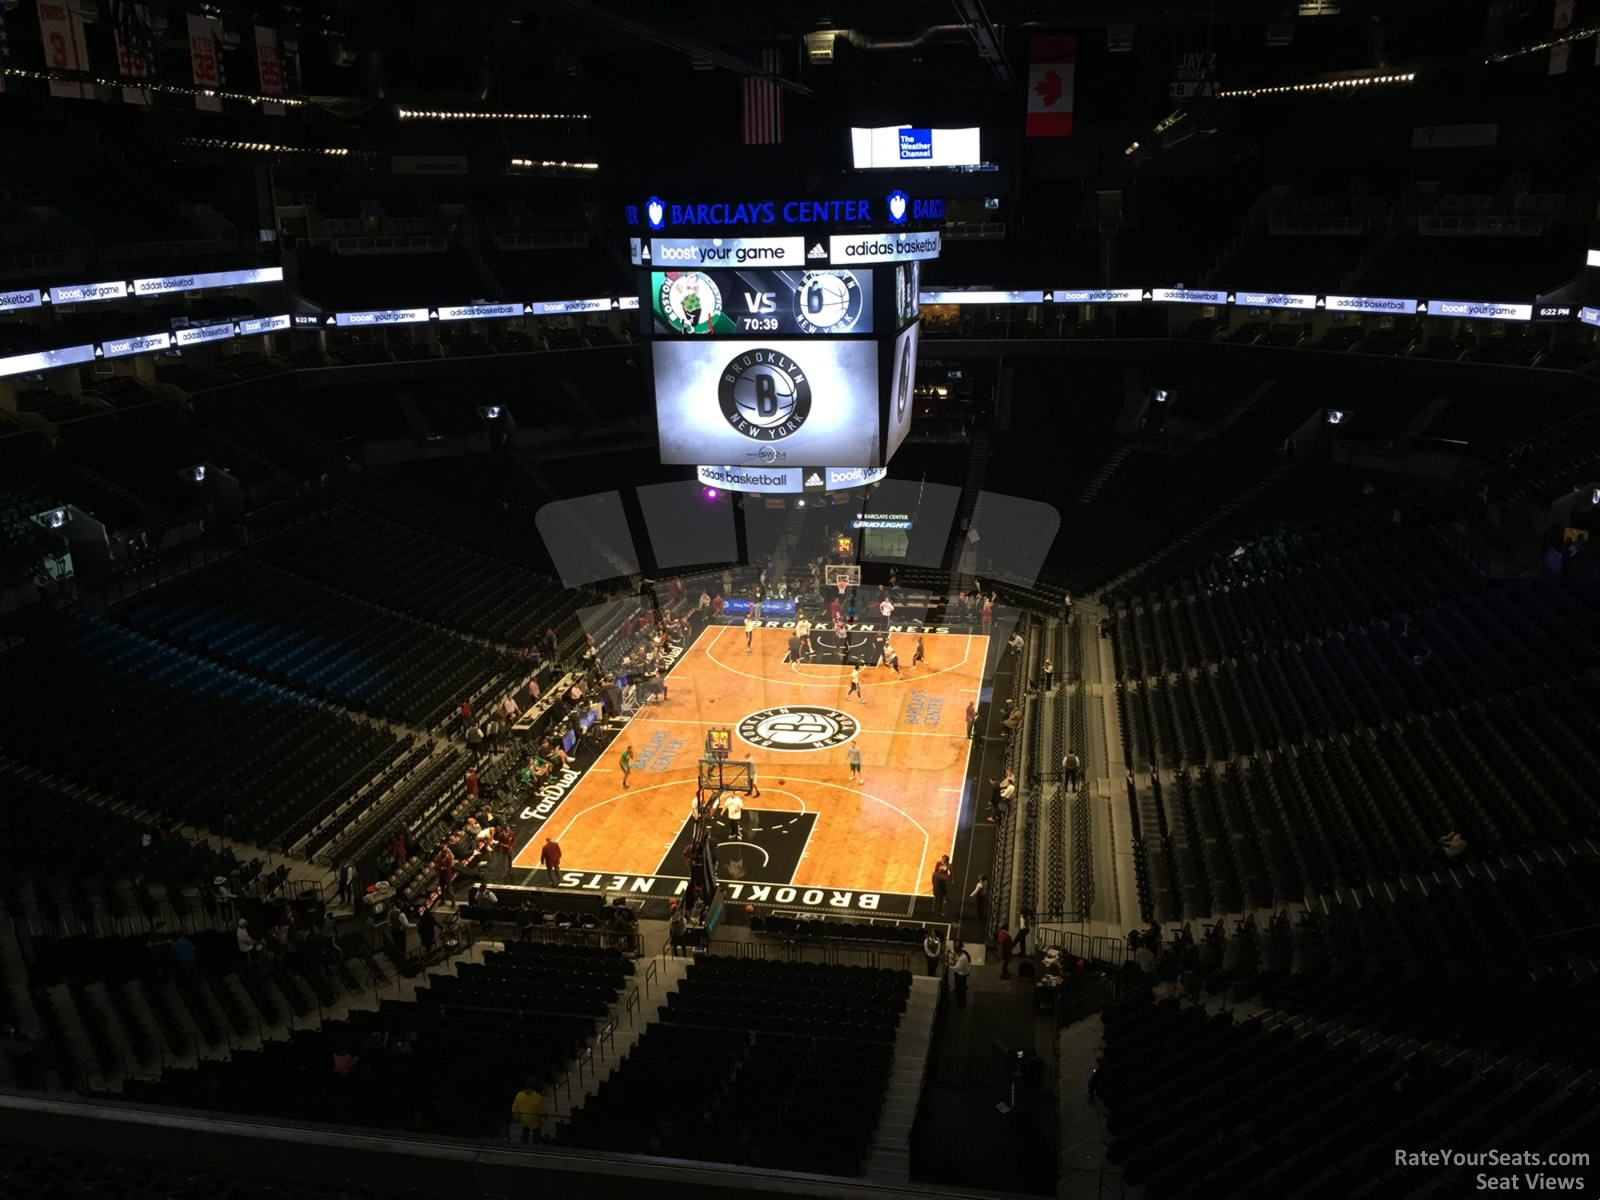 section 231, row 10 seat view  for basketball - barclays center